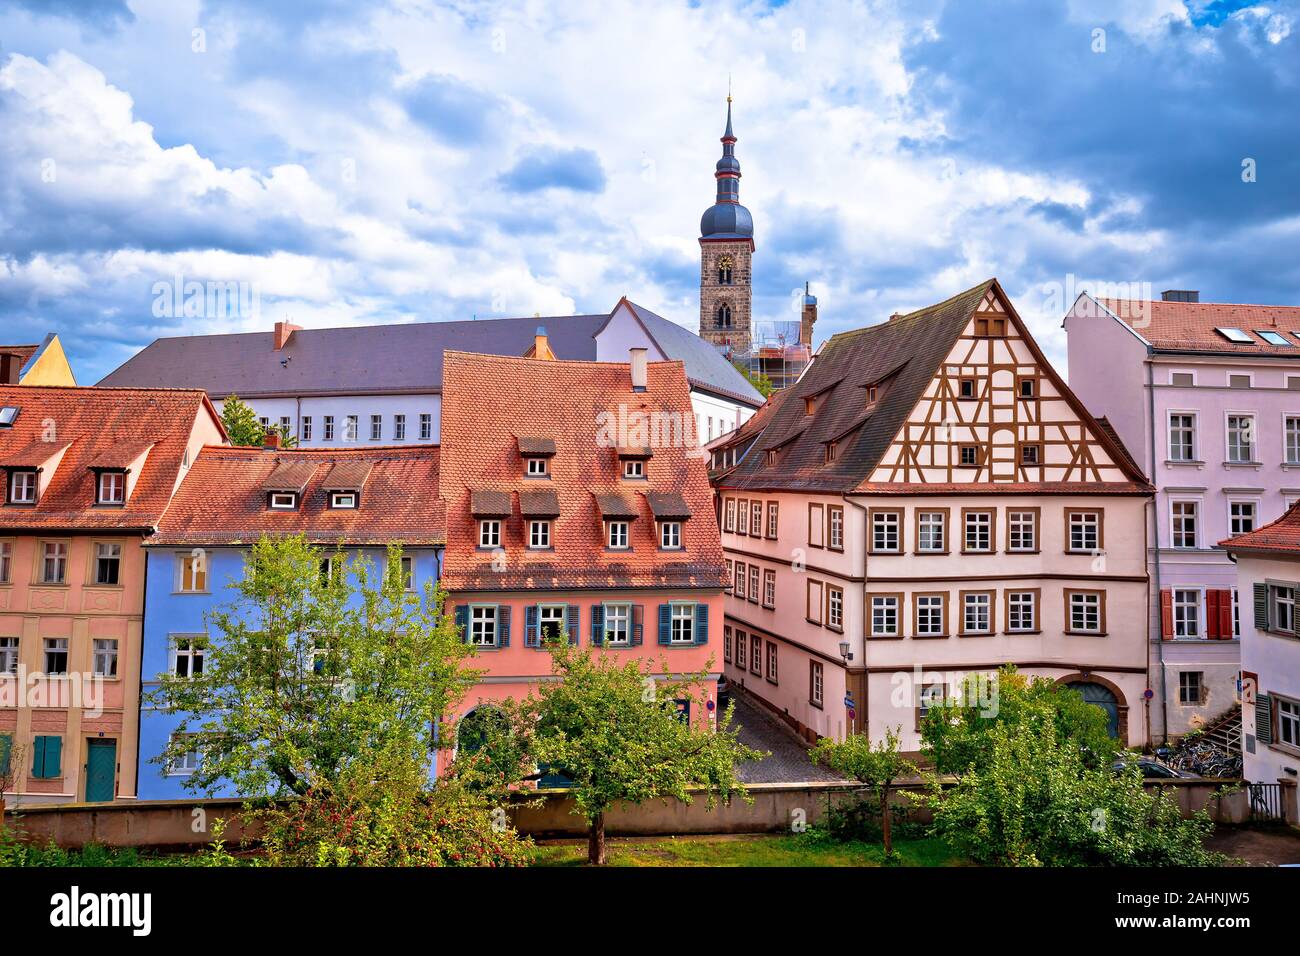 Bamberg. Old town of Bamberg historic street and architecture view, Bavaria region of Germany Stock Photo